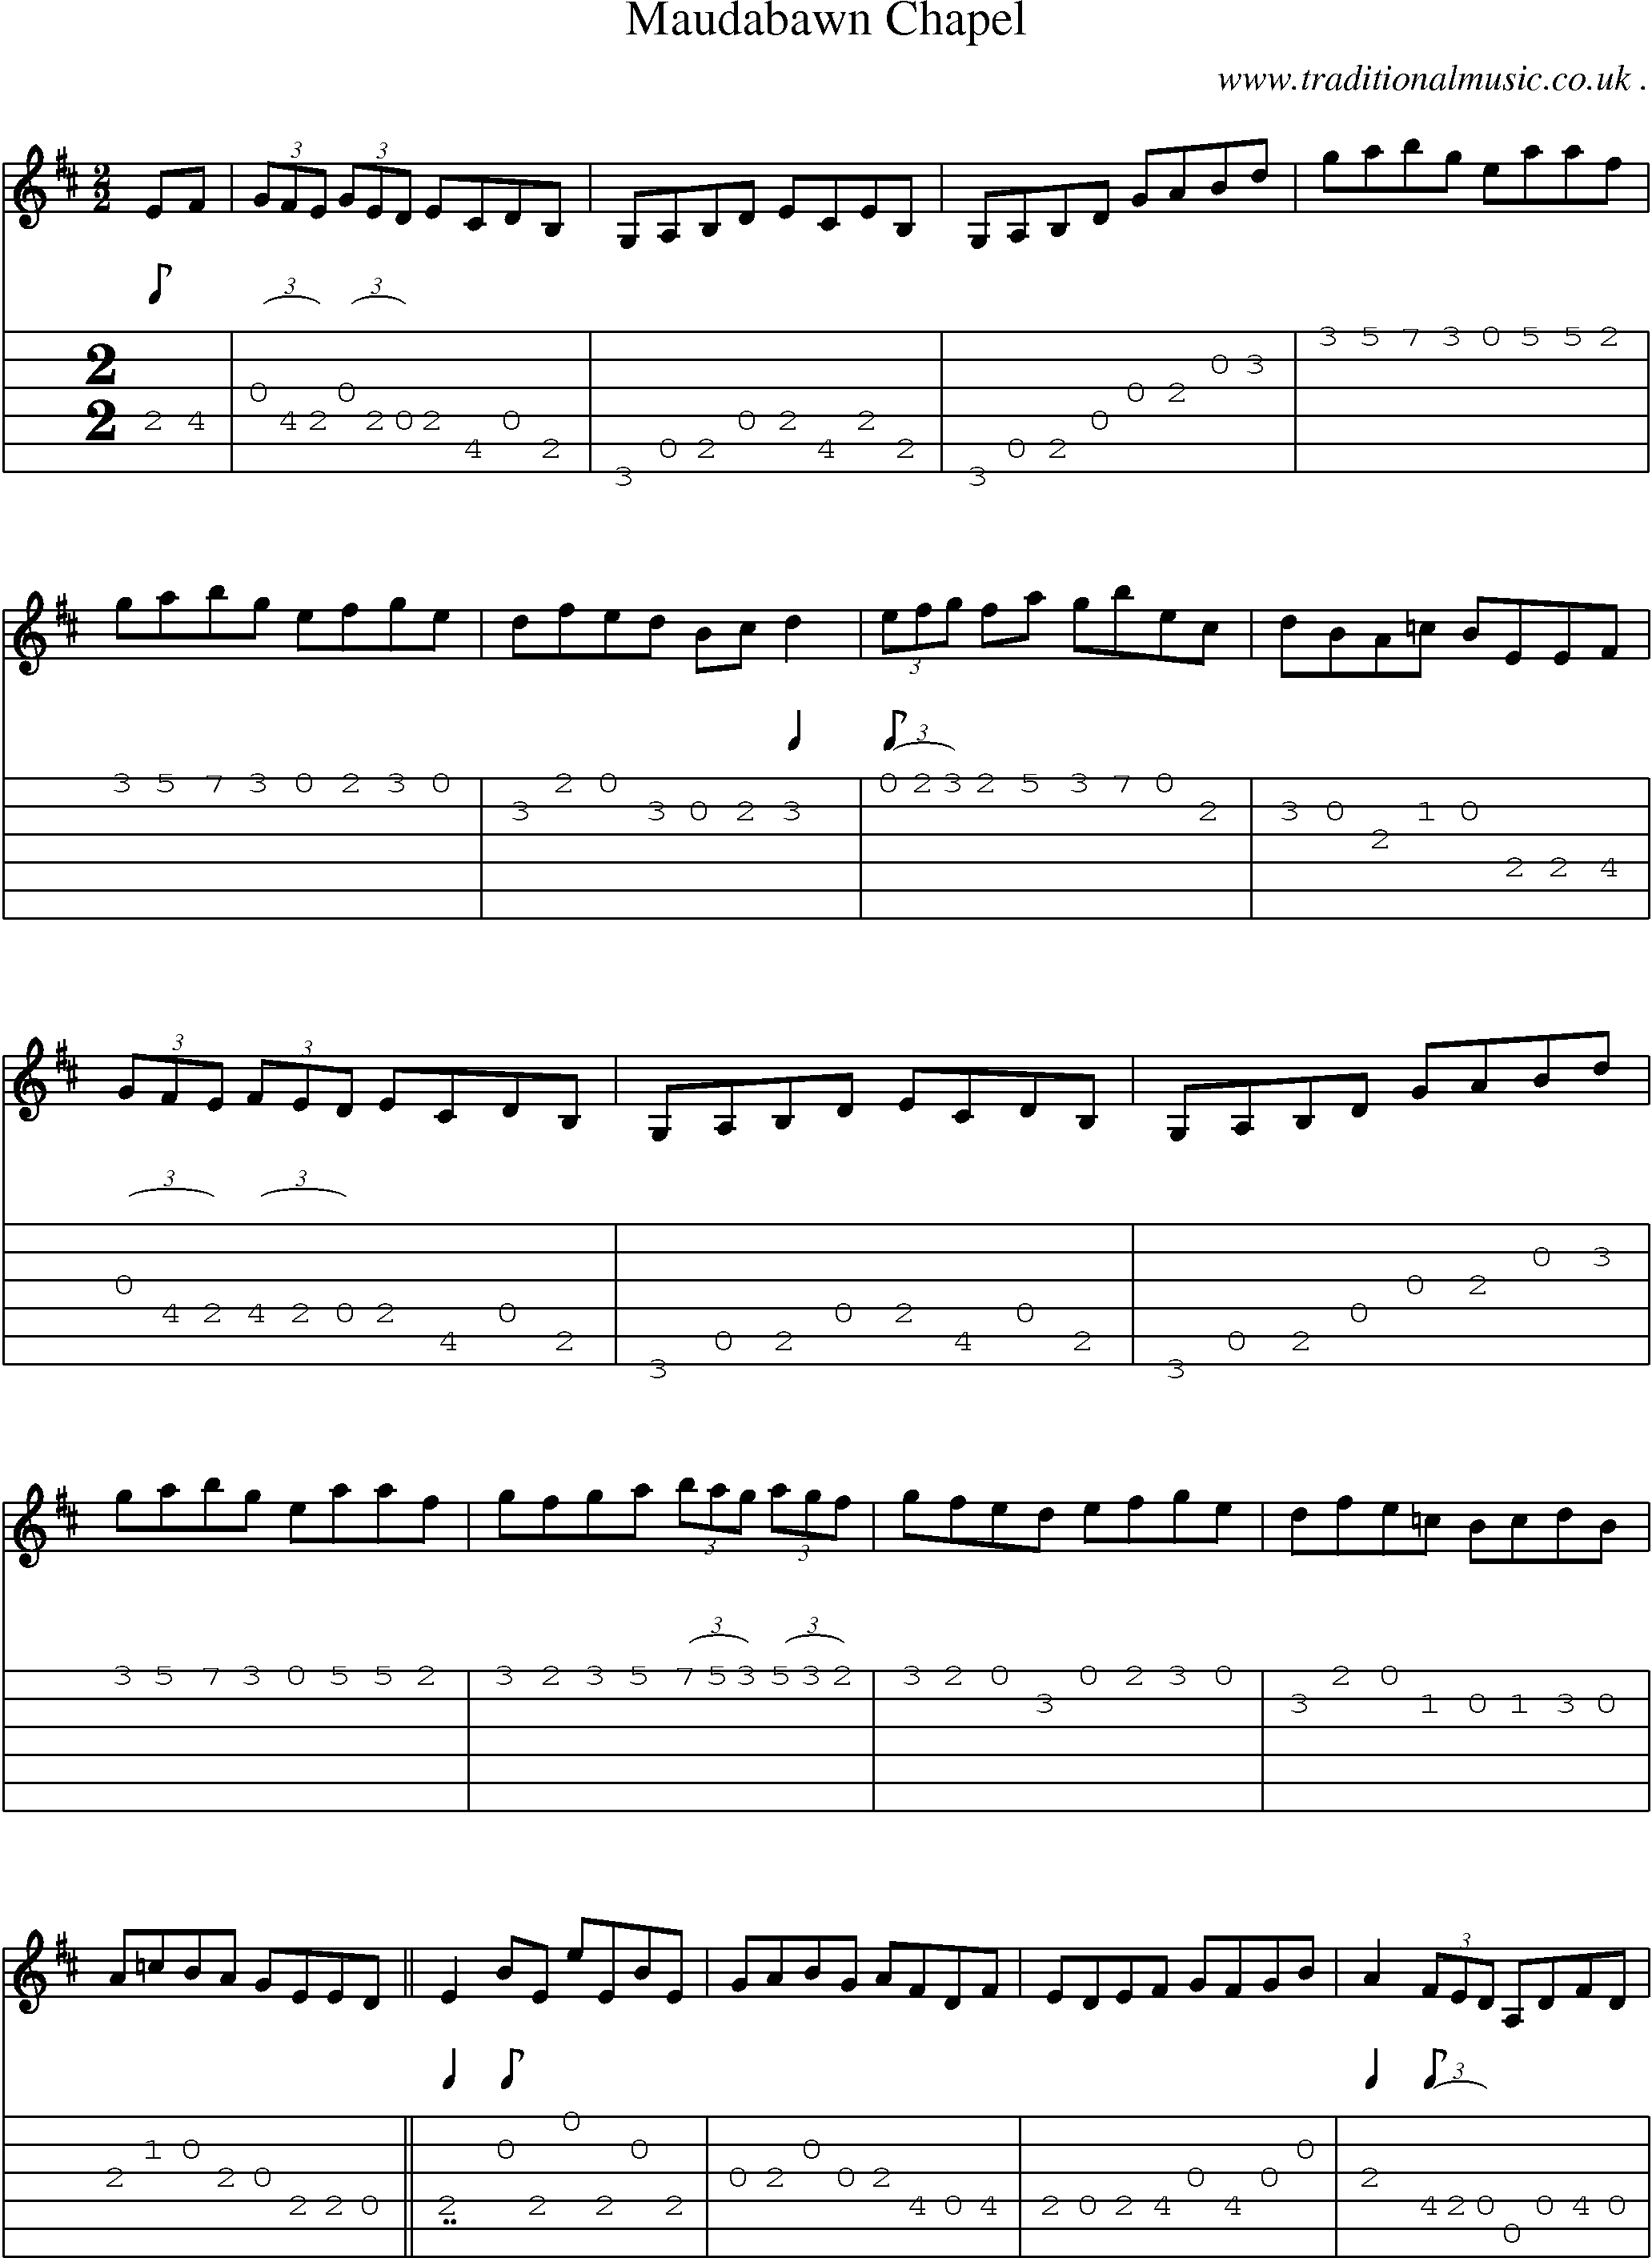 Sheet-Music and Guitar Tabs for Maudabawn Chapel